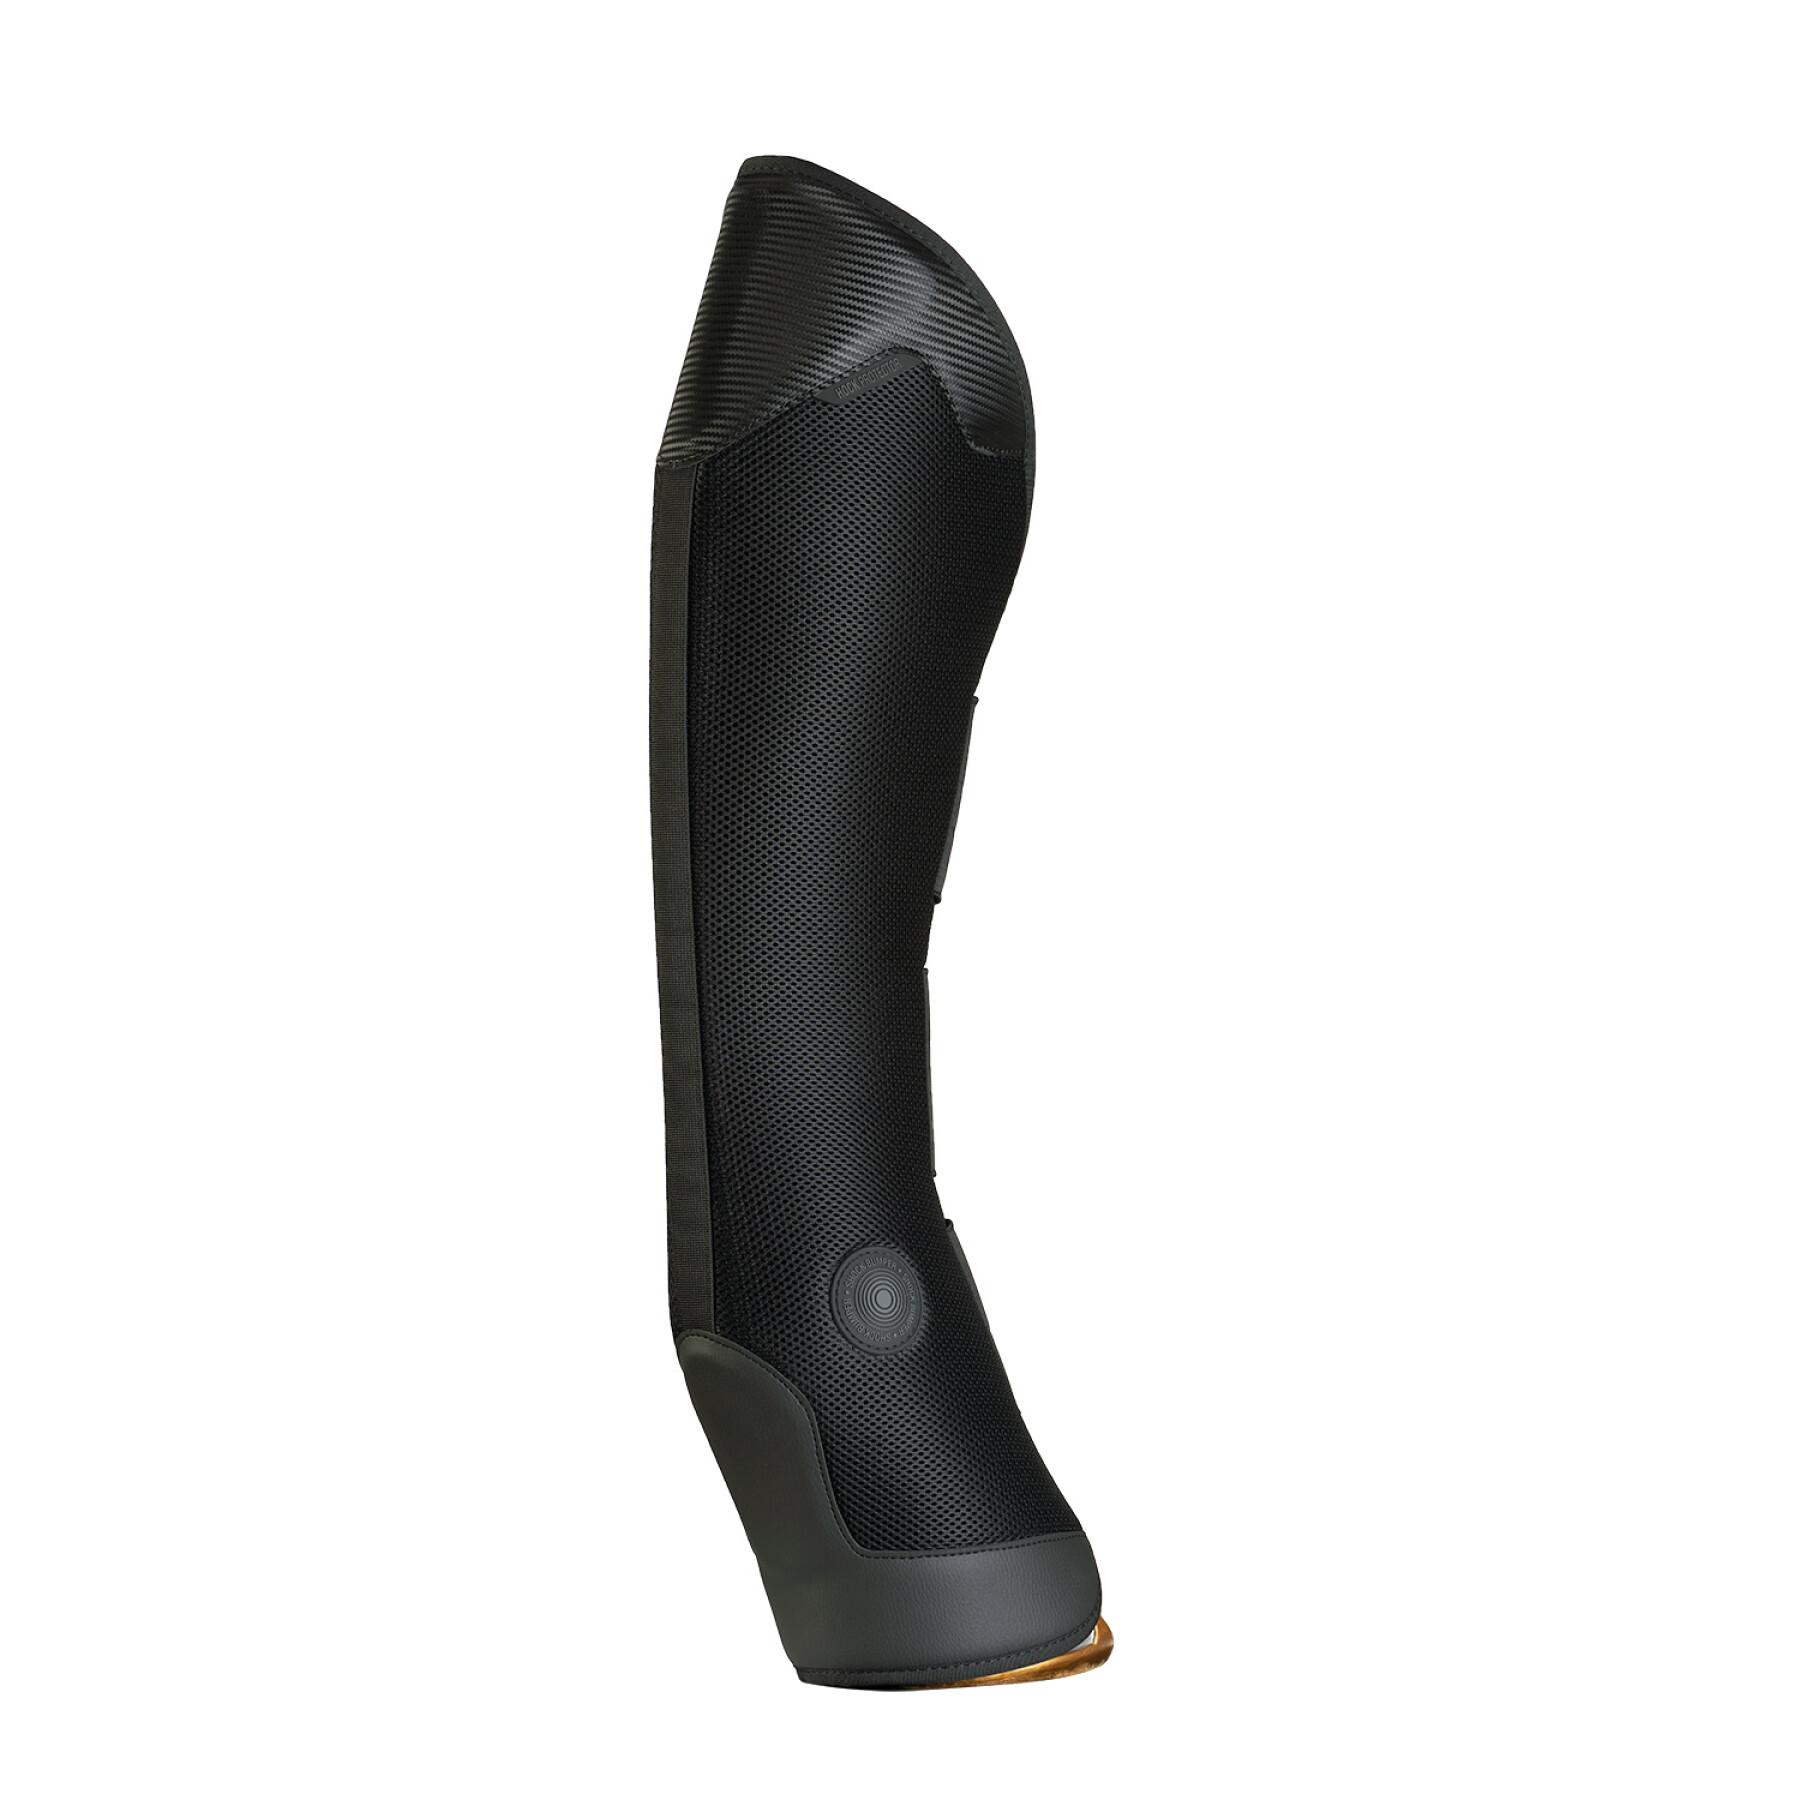 Hind carriage gaiters for horses Zandona Pro-Safe Boot